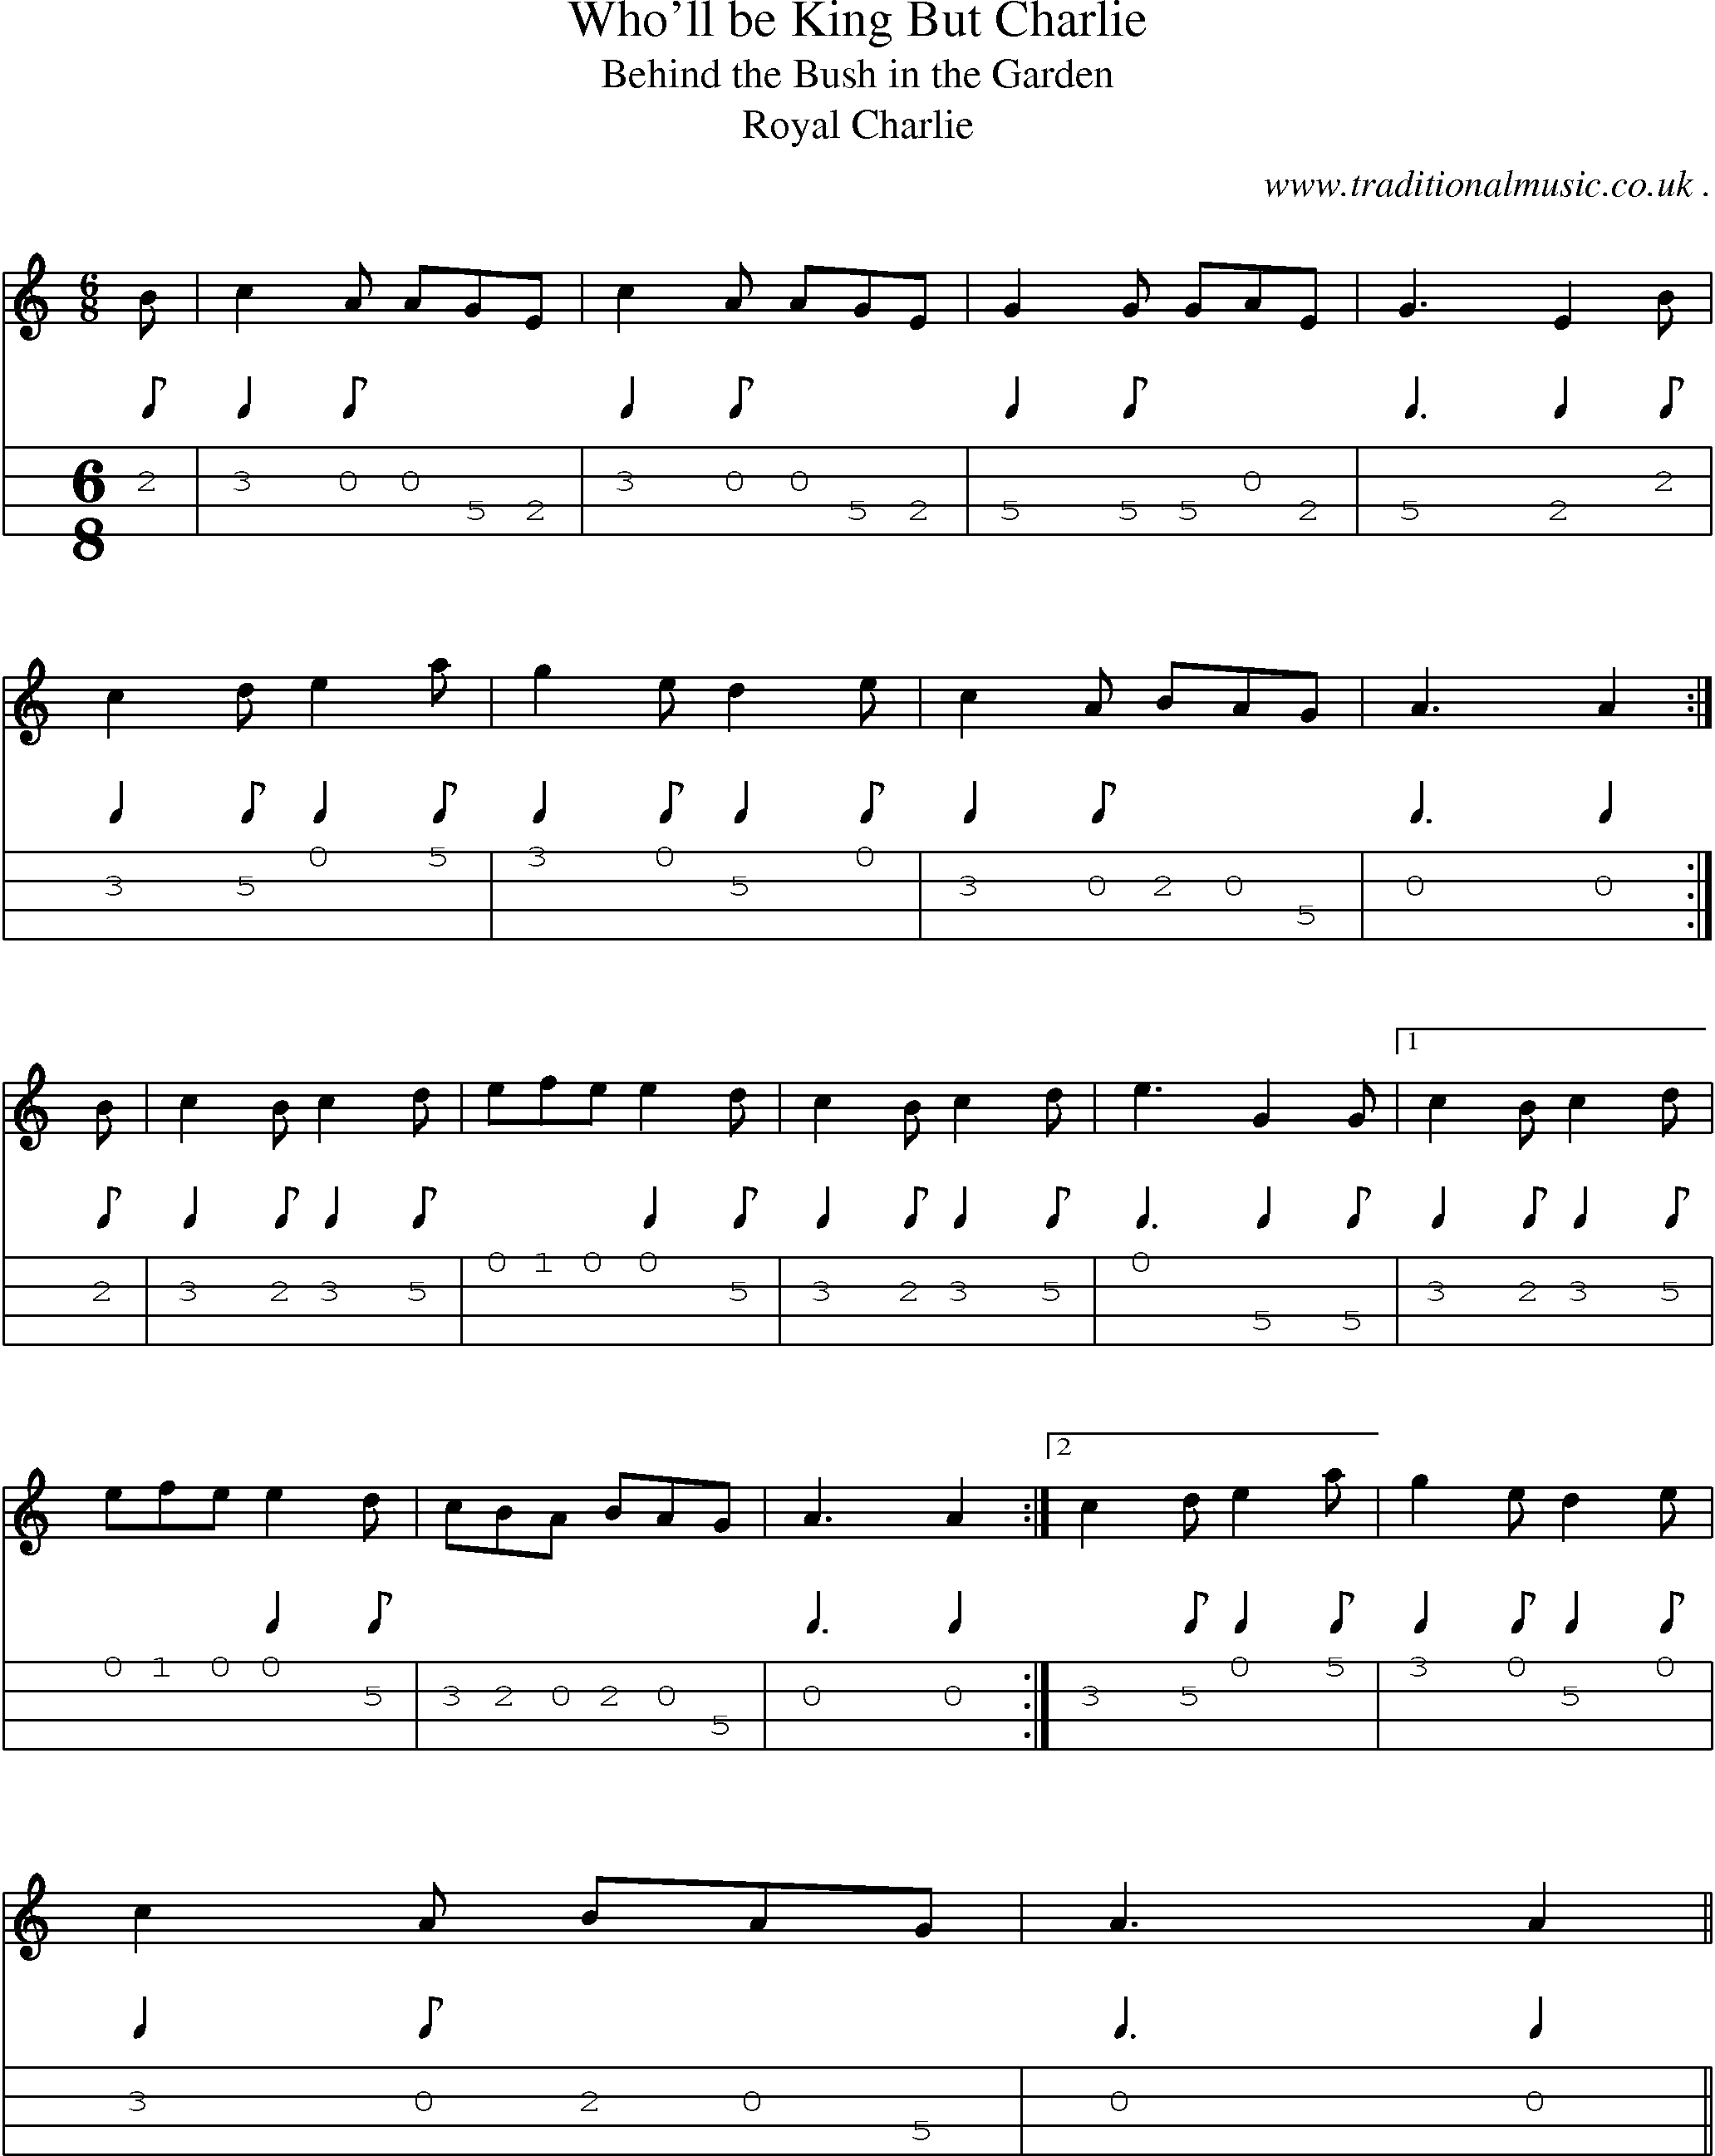 Sheet-Music and Mandolin Tabs for Wholl Be King But Charlie